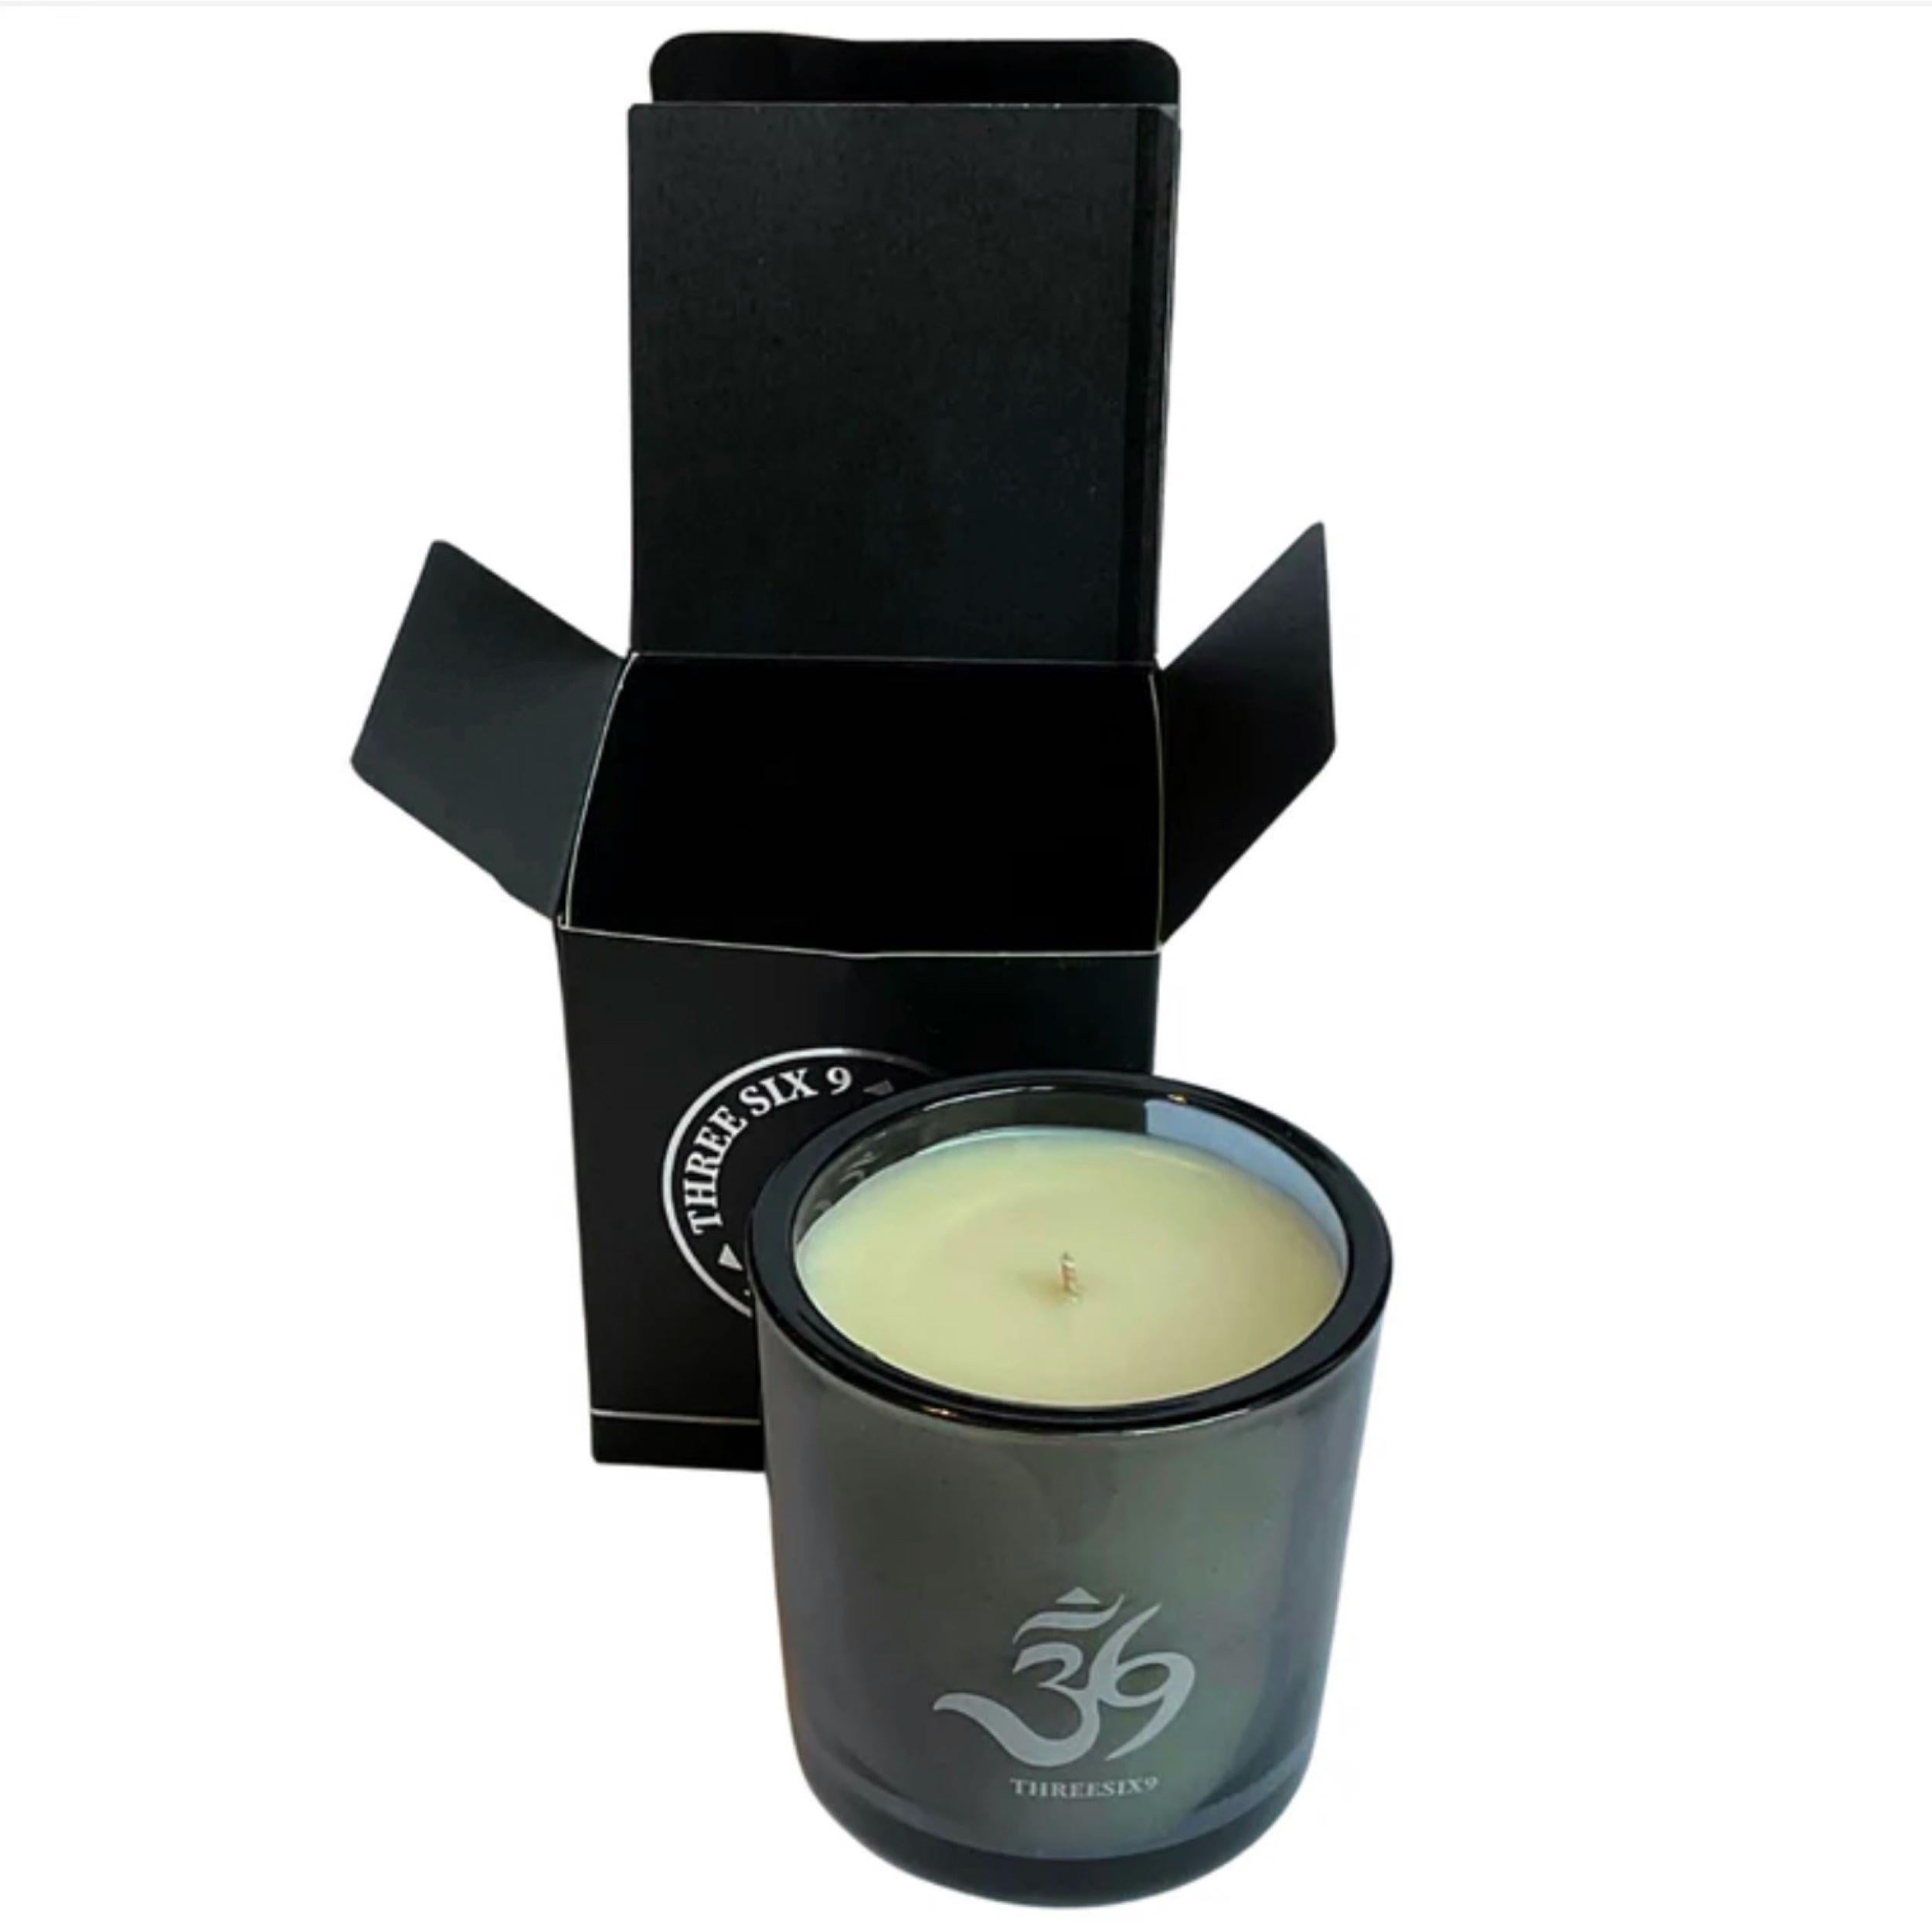 ThreeSix9
Signature scent candle in glass container.
The scent is a beautiful, strong Gardenia.
ThreeSix9 is made entirely in Los Angeles, California.
The Candles are all Hand Poured in Los Angeles.
369
 